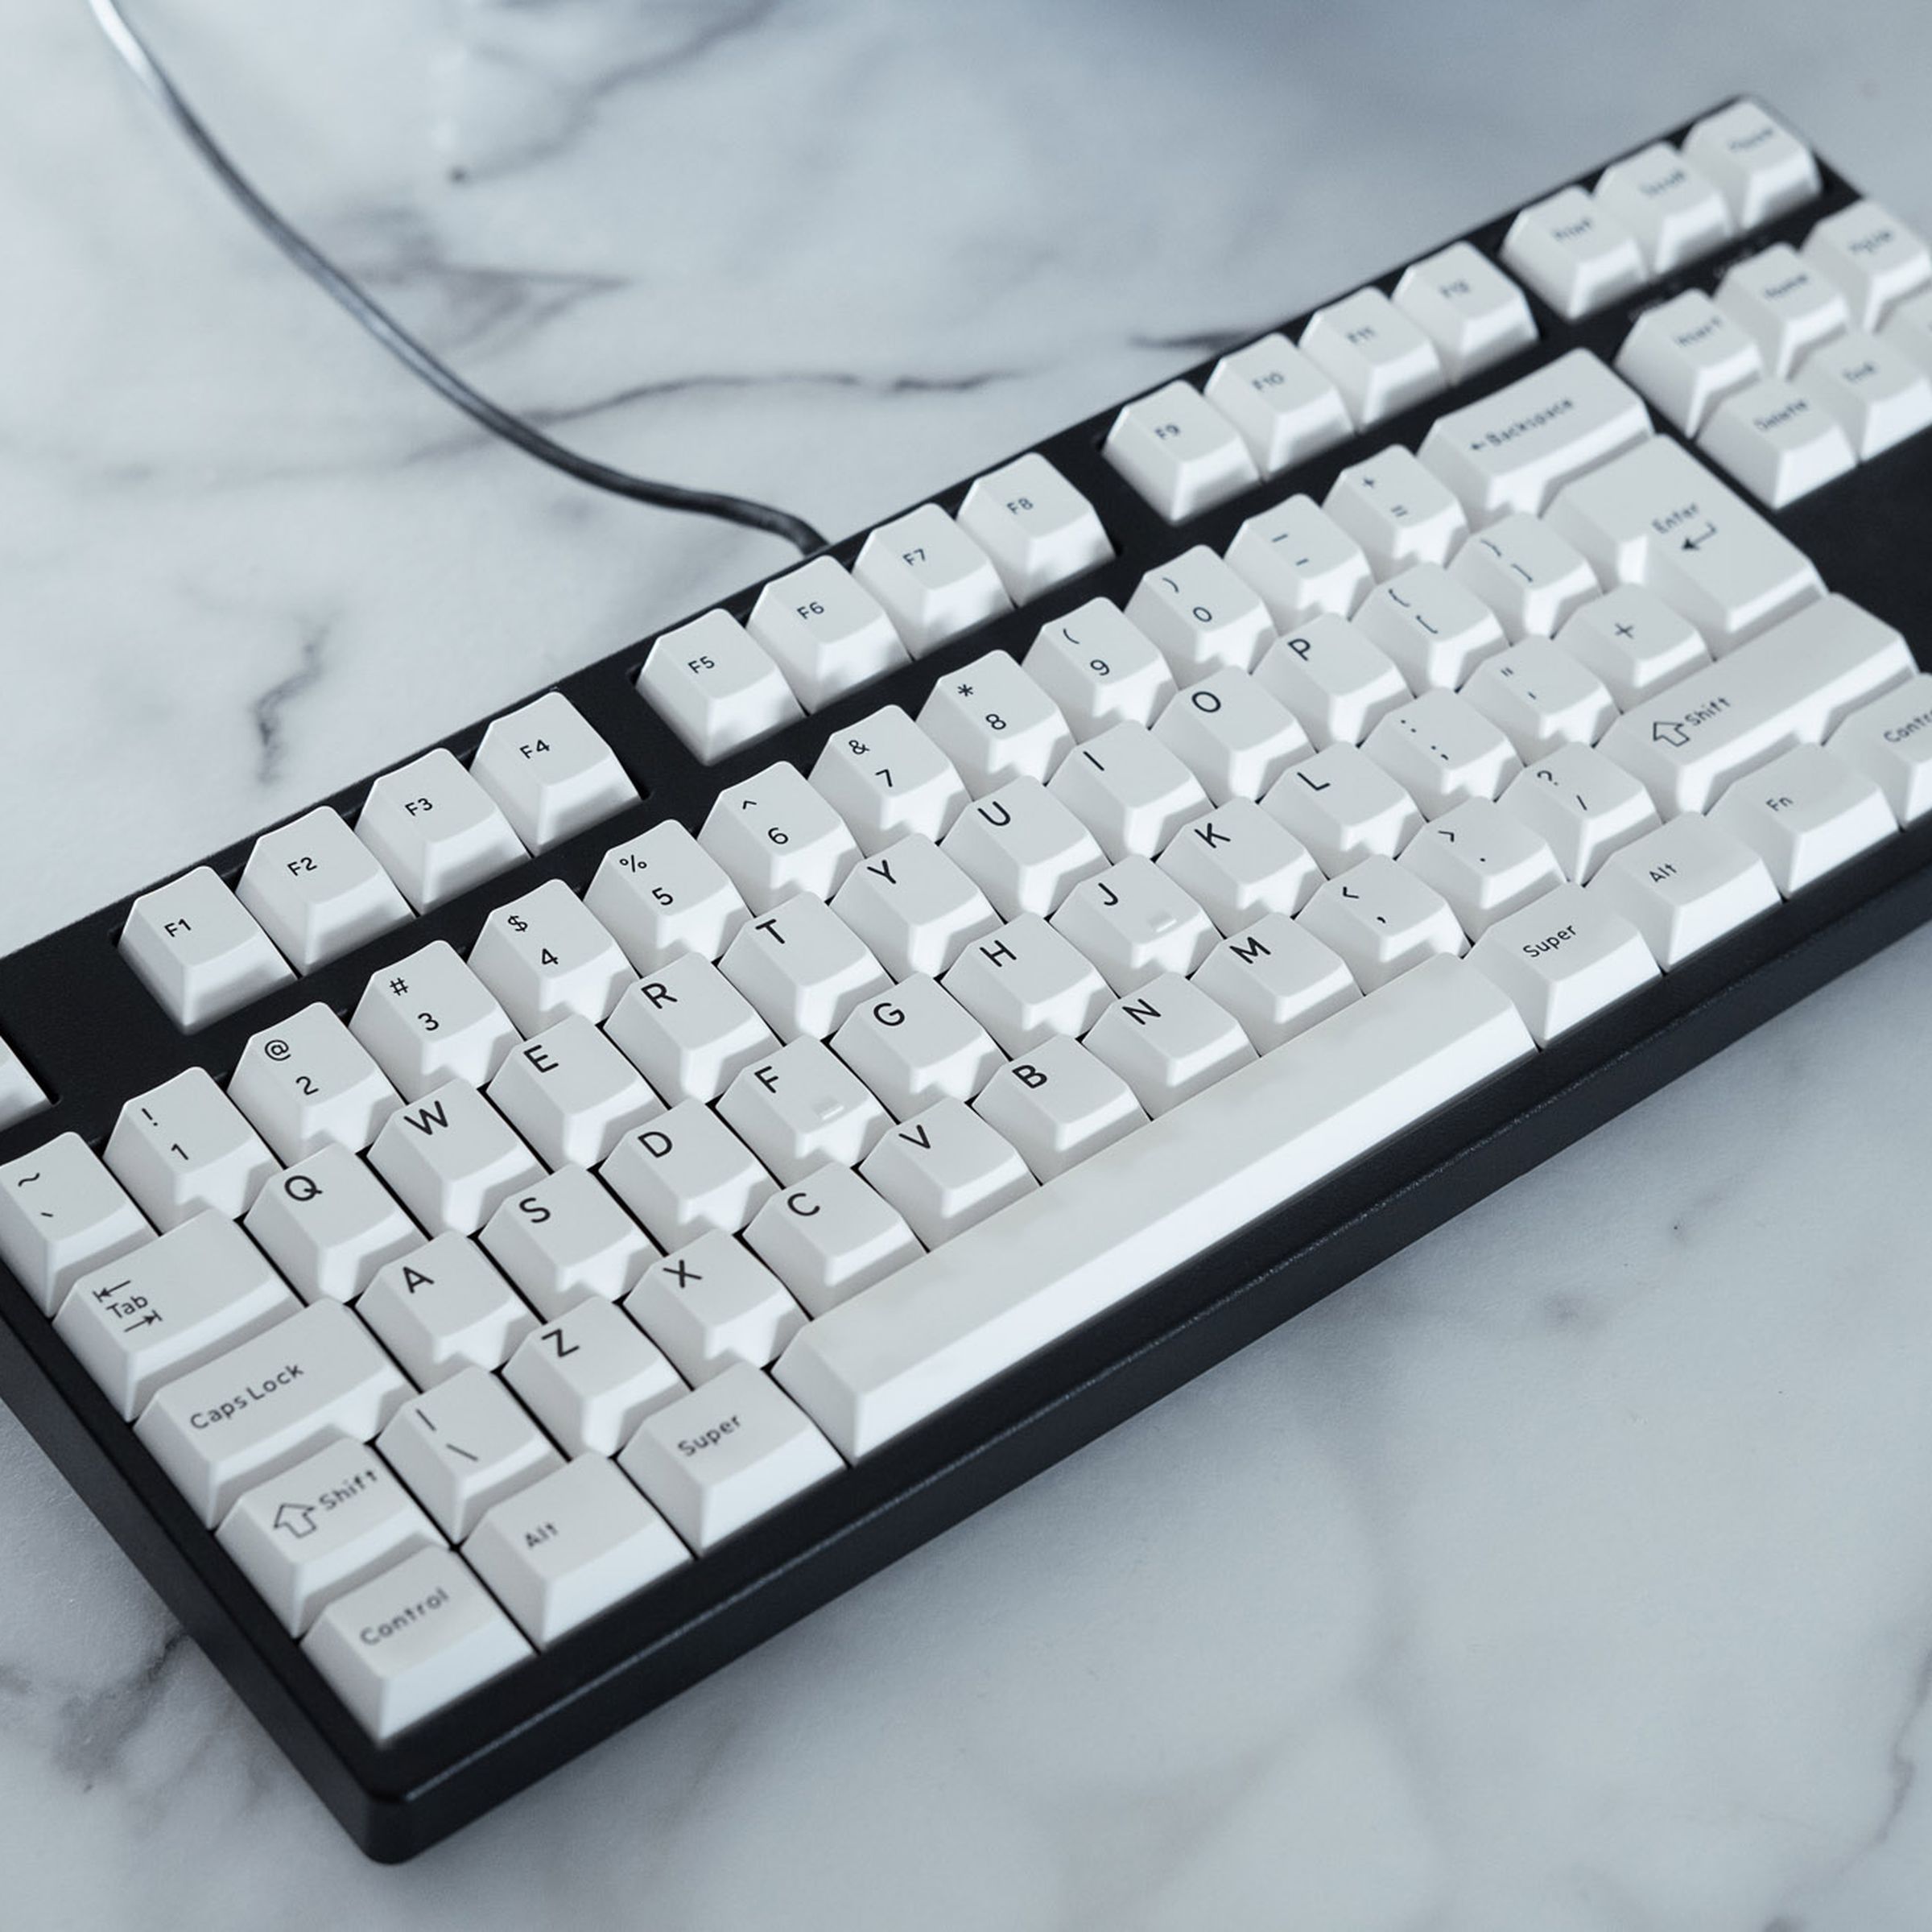 A black mechanical keyboard with white keycaps on a white marble table.